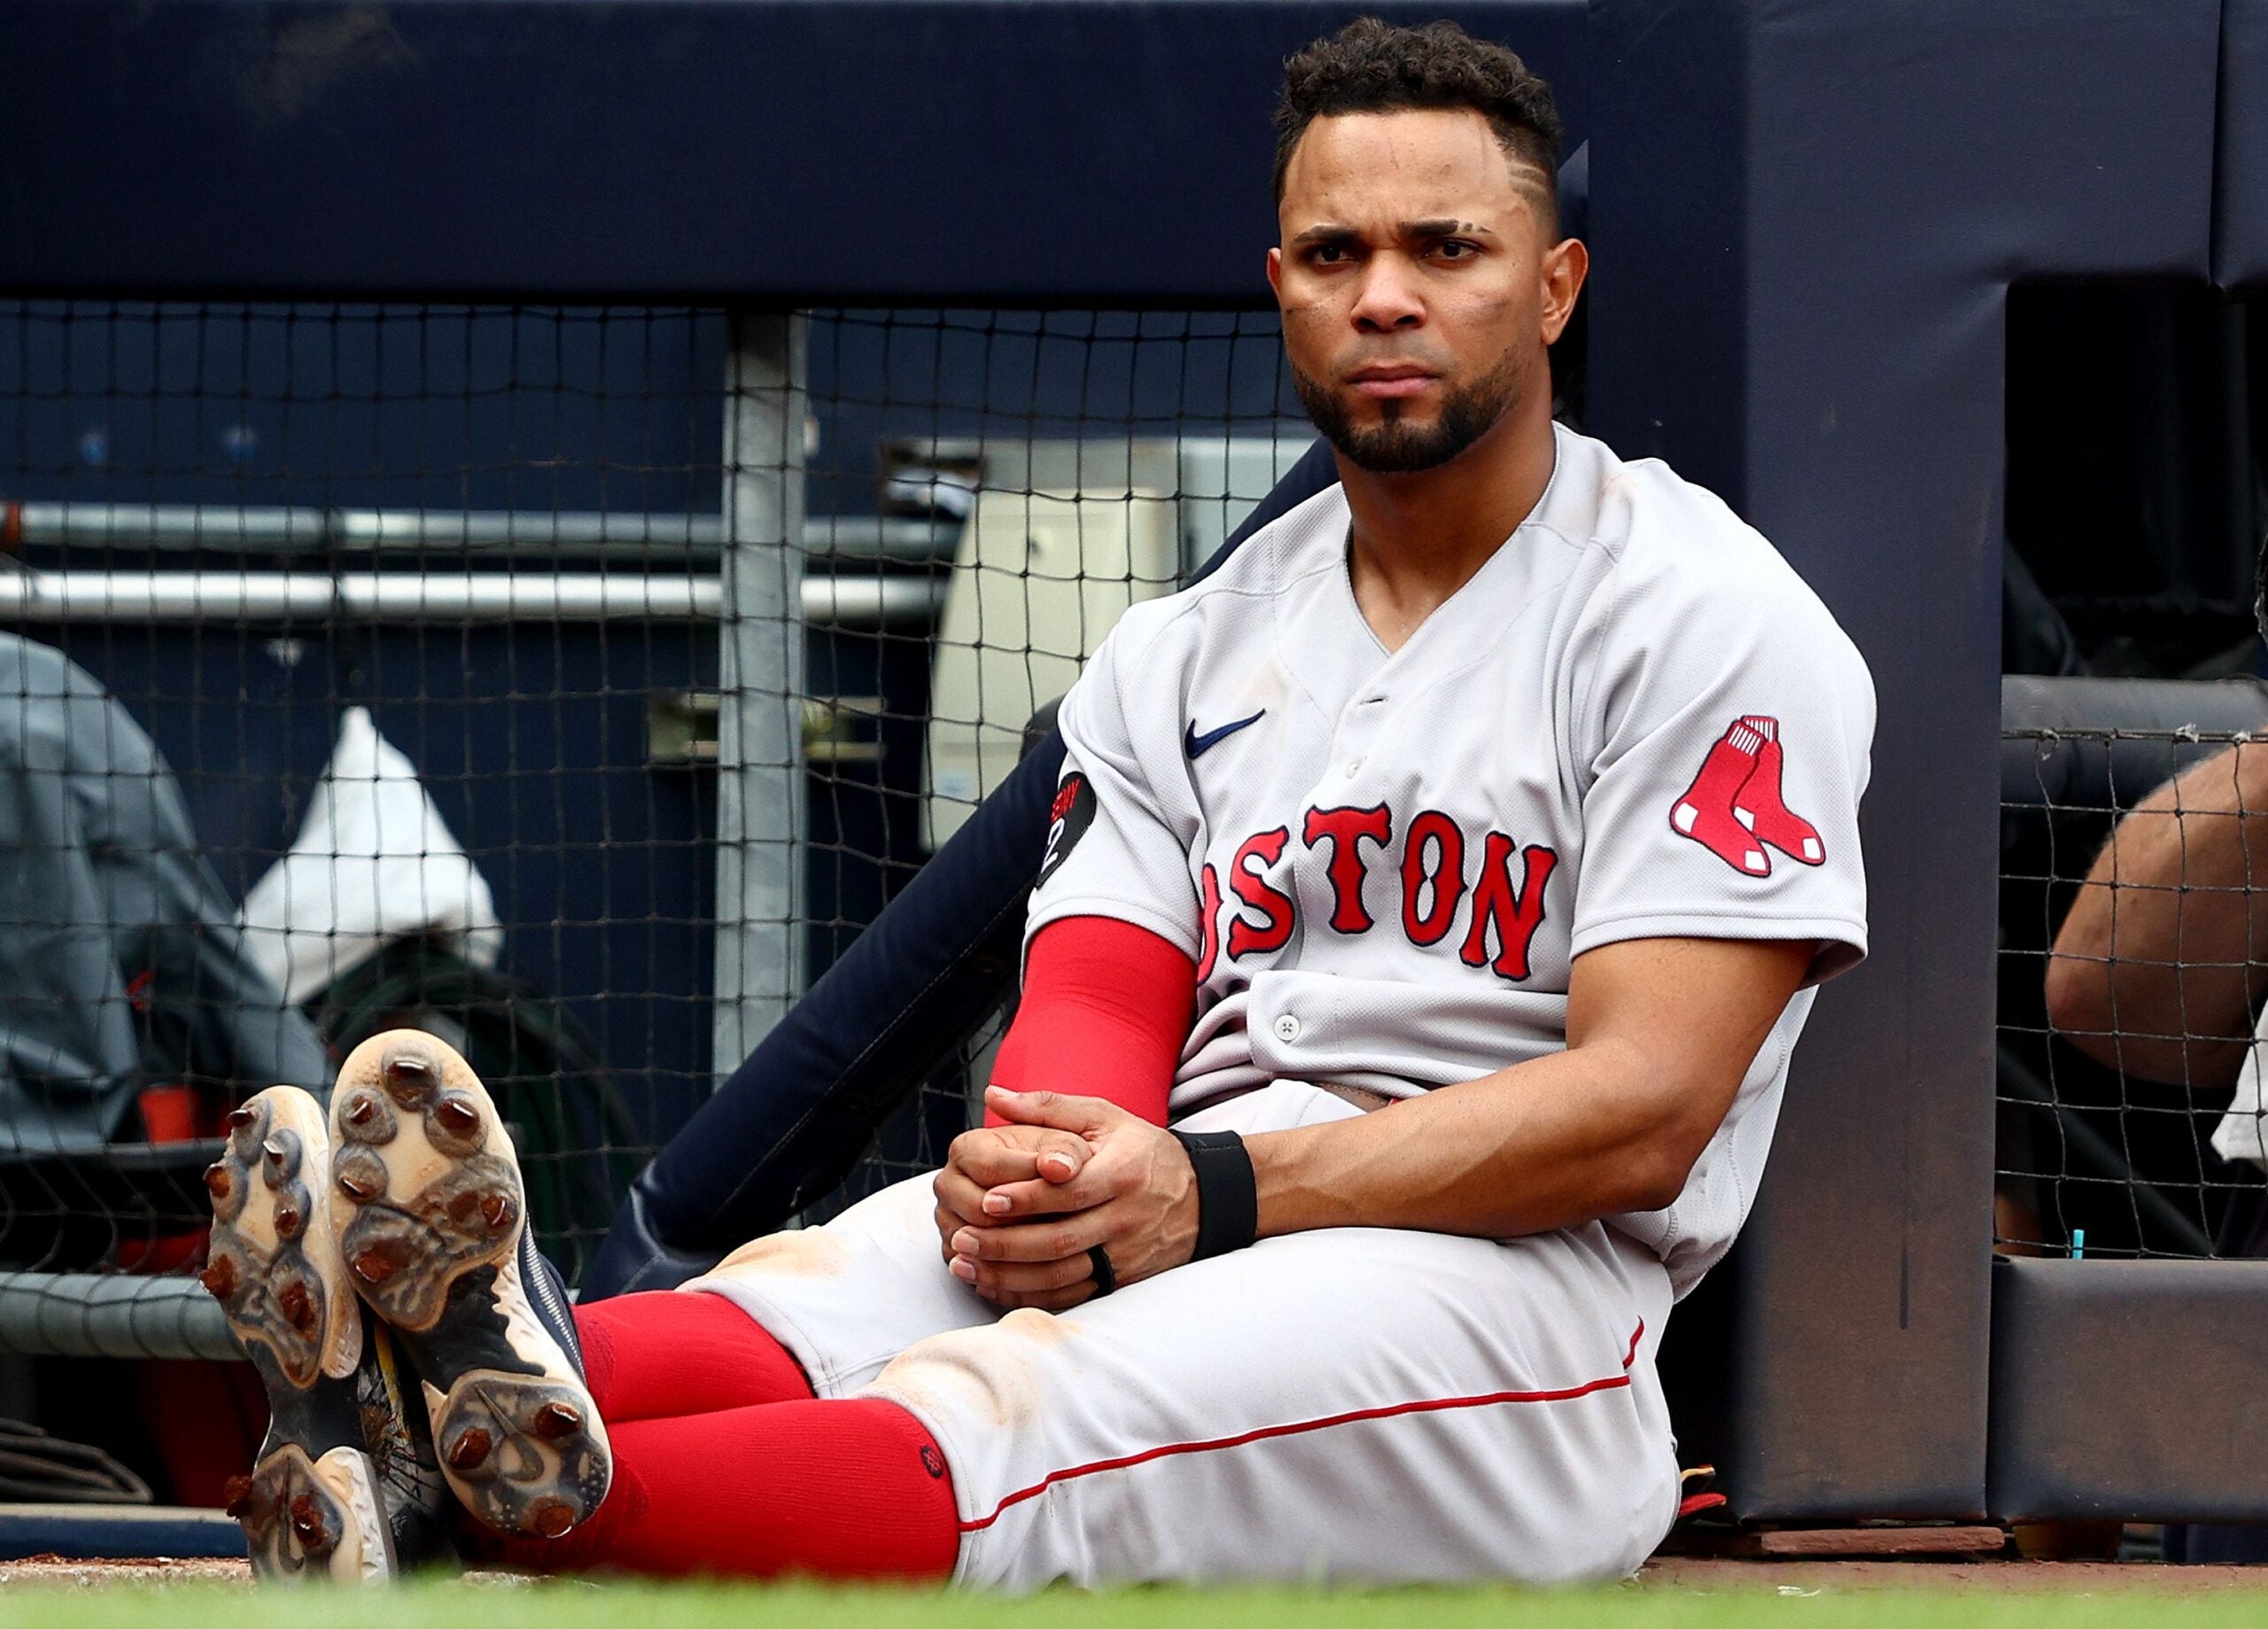 Red Sox make history in blowout loss to Yankees entering the All-Star break